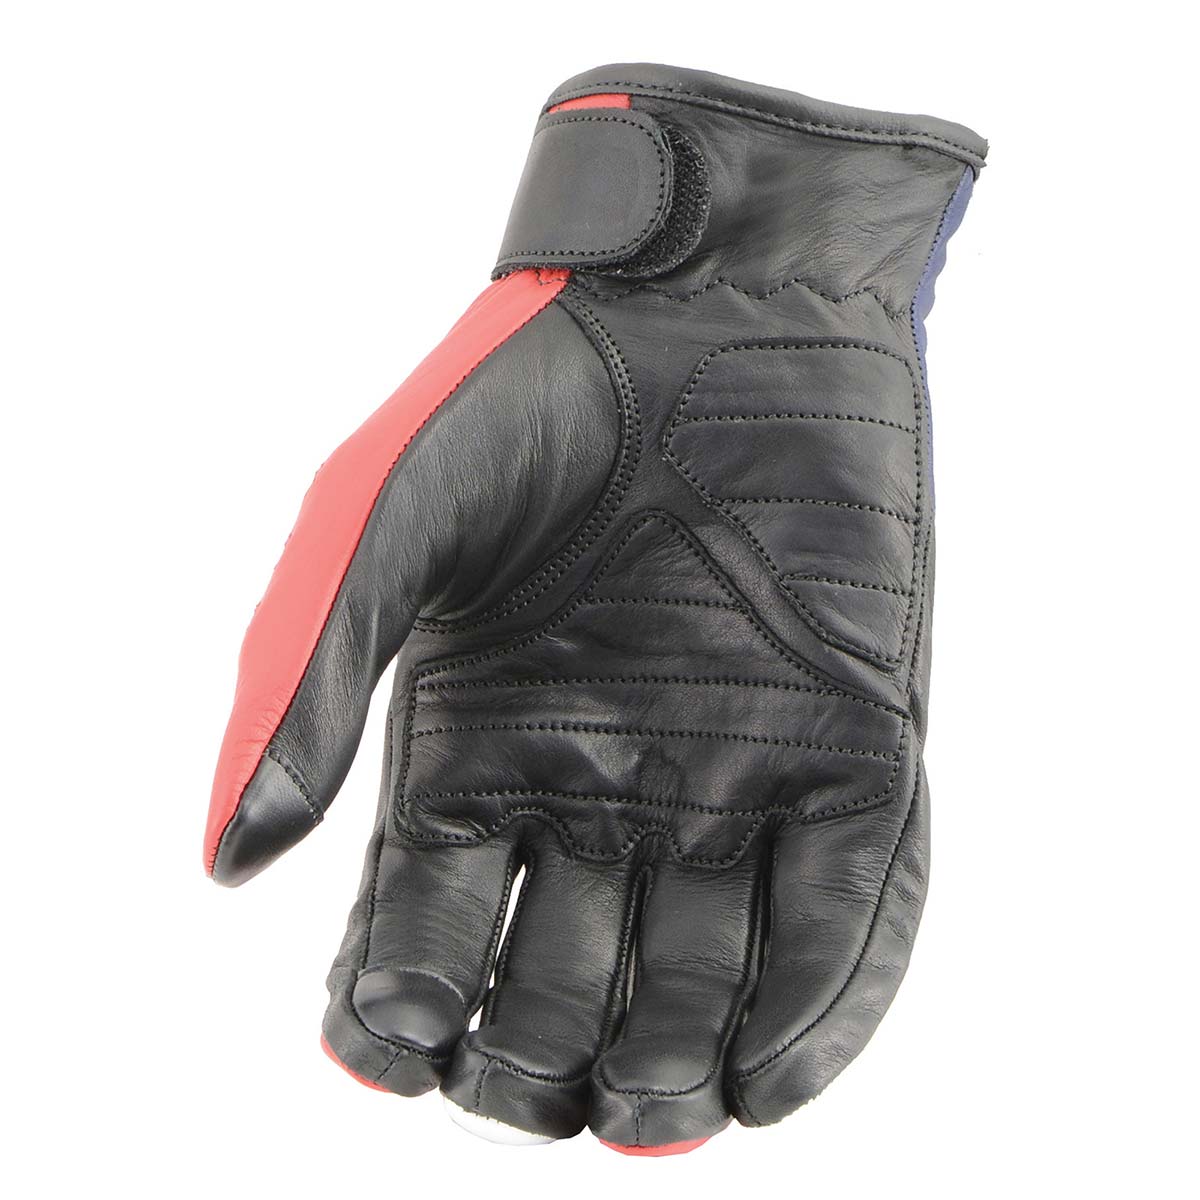 Milwaukee Leather MG7527 Men's Black Leather i-Touch Screen Compatible Motorcycle Hand Gloves w/ Stars and Stripes